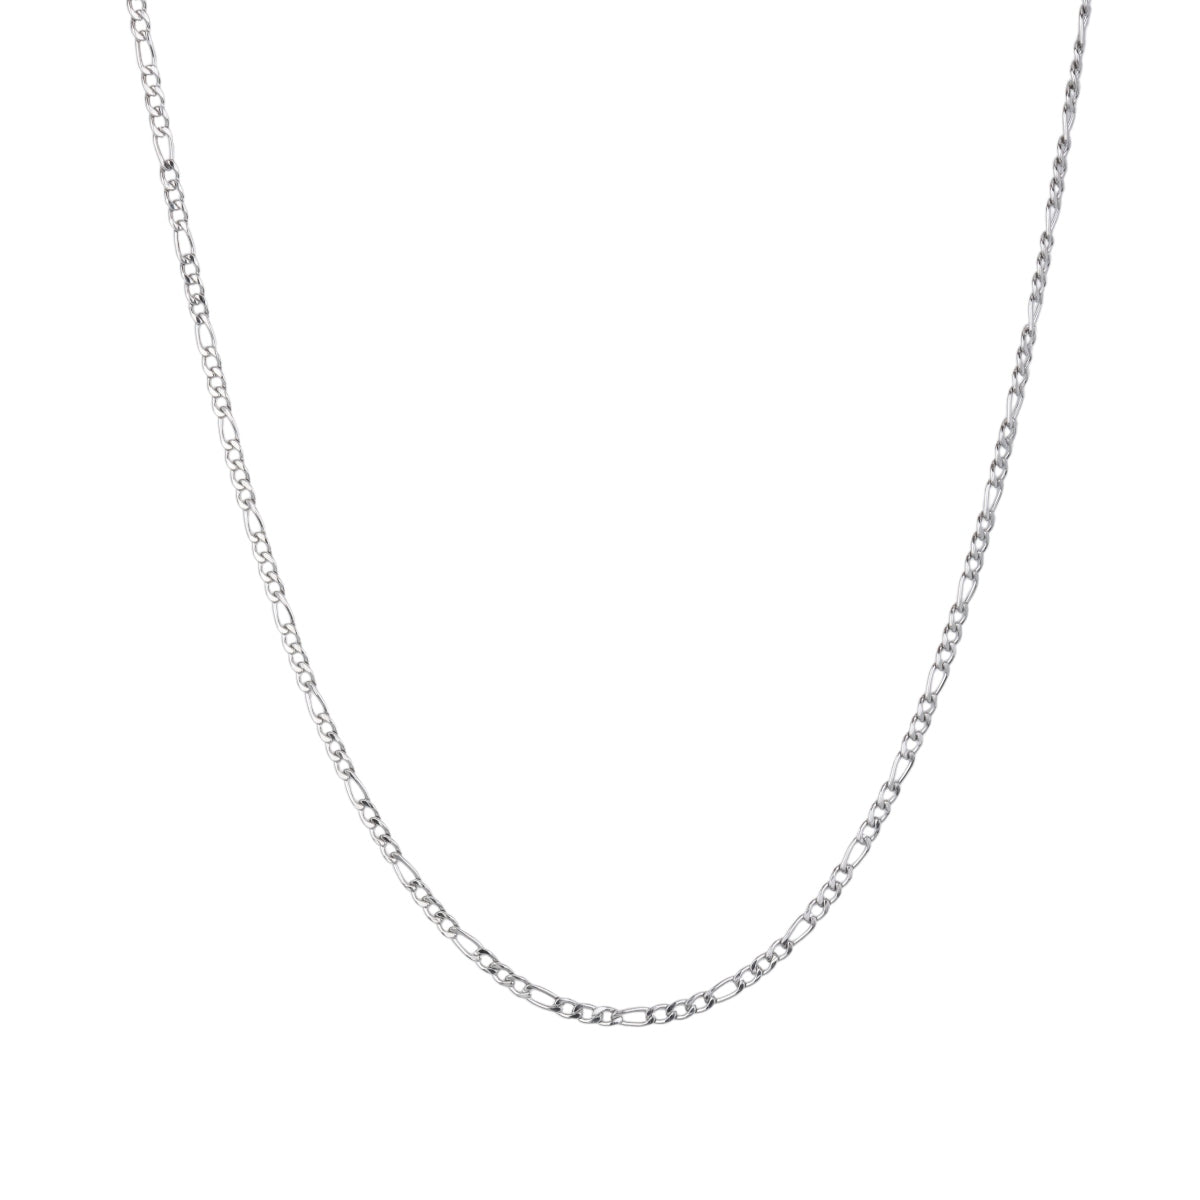 Silver Figaro Chain Necklace (4mm)